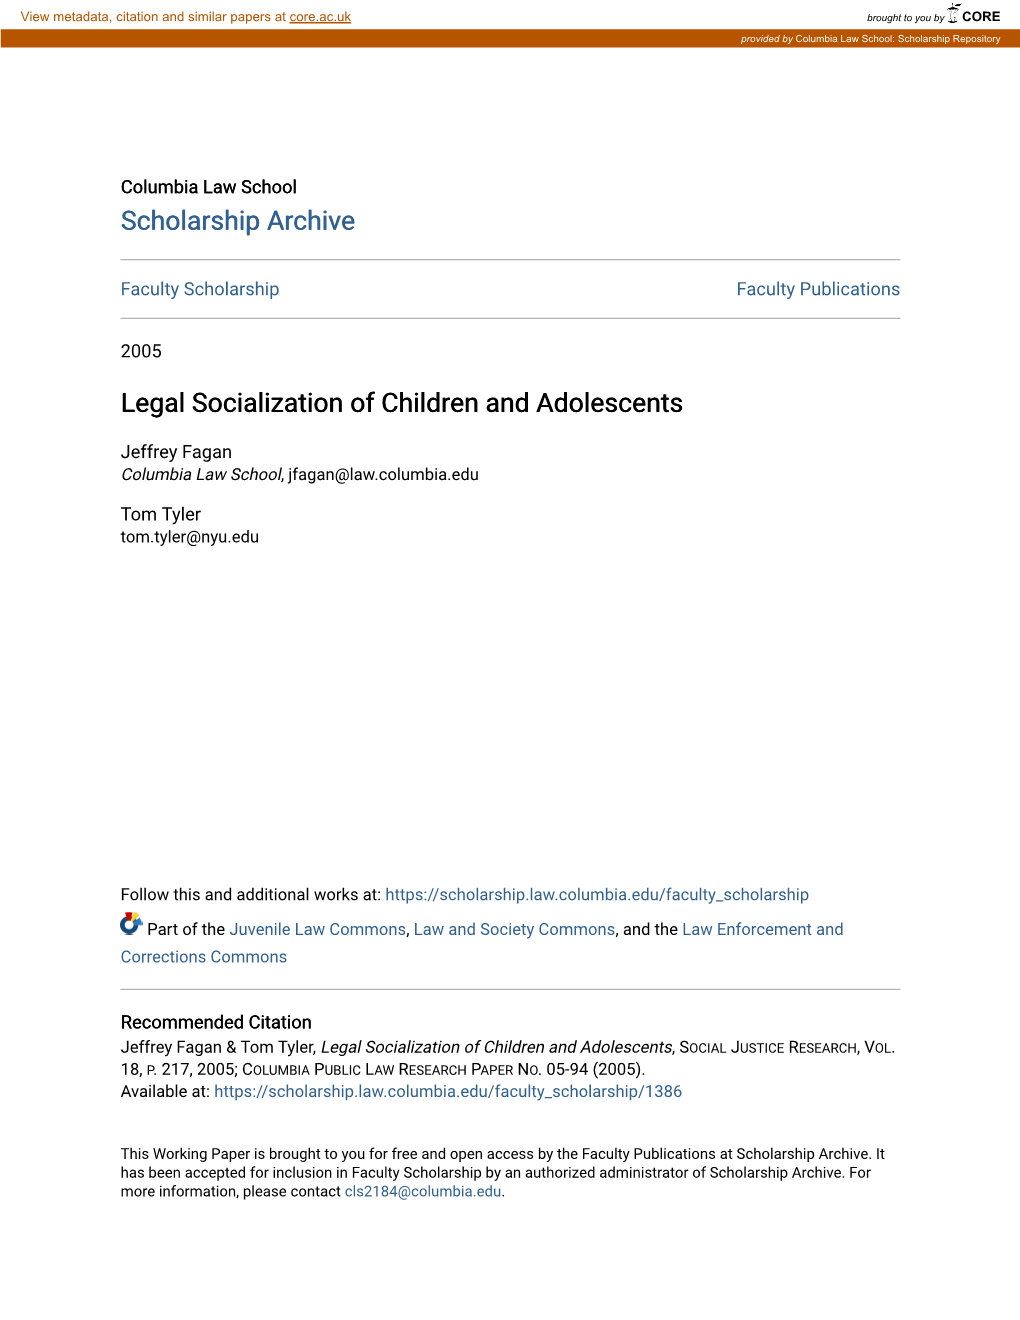 Legal Socialization of Children and Adolescents